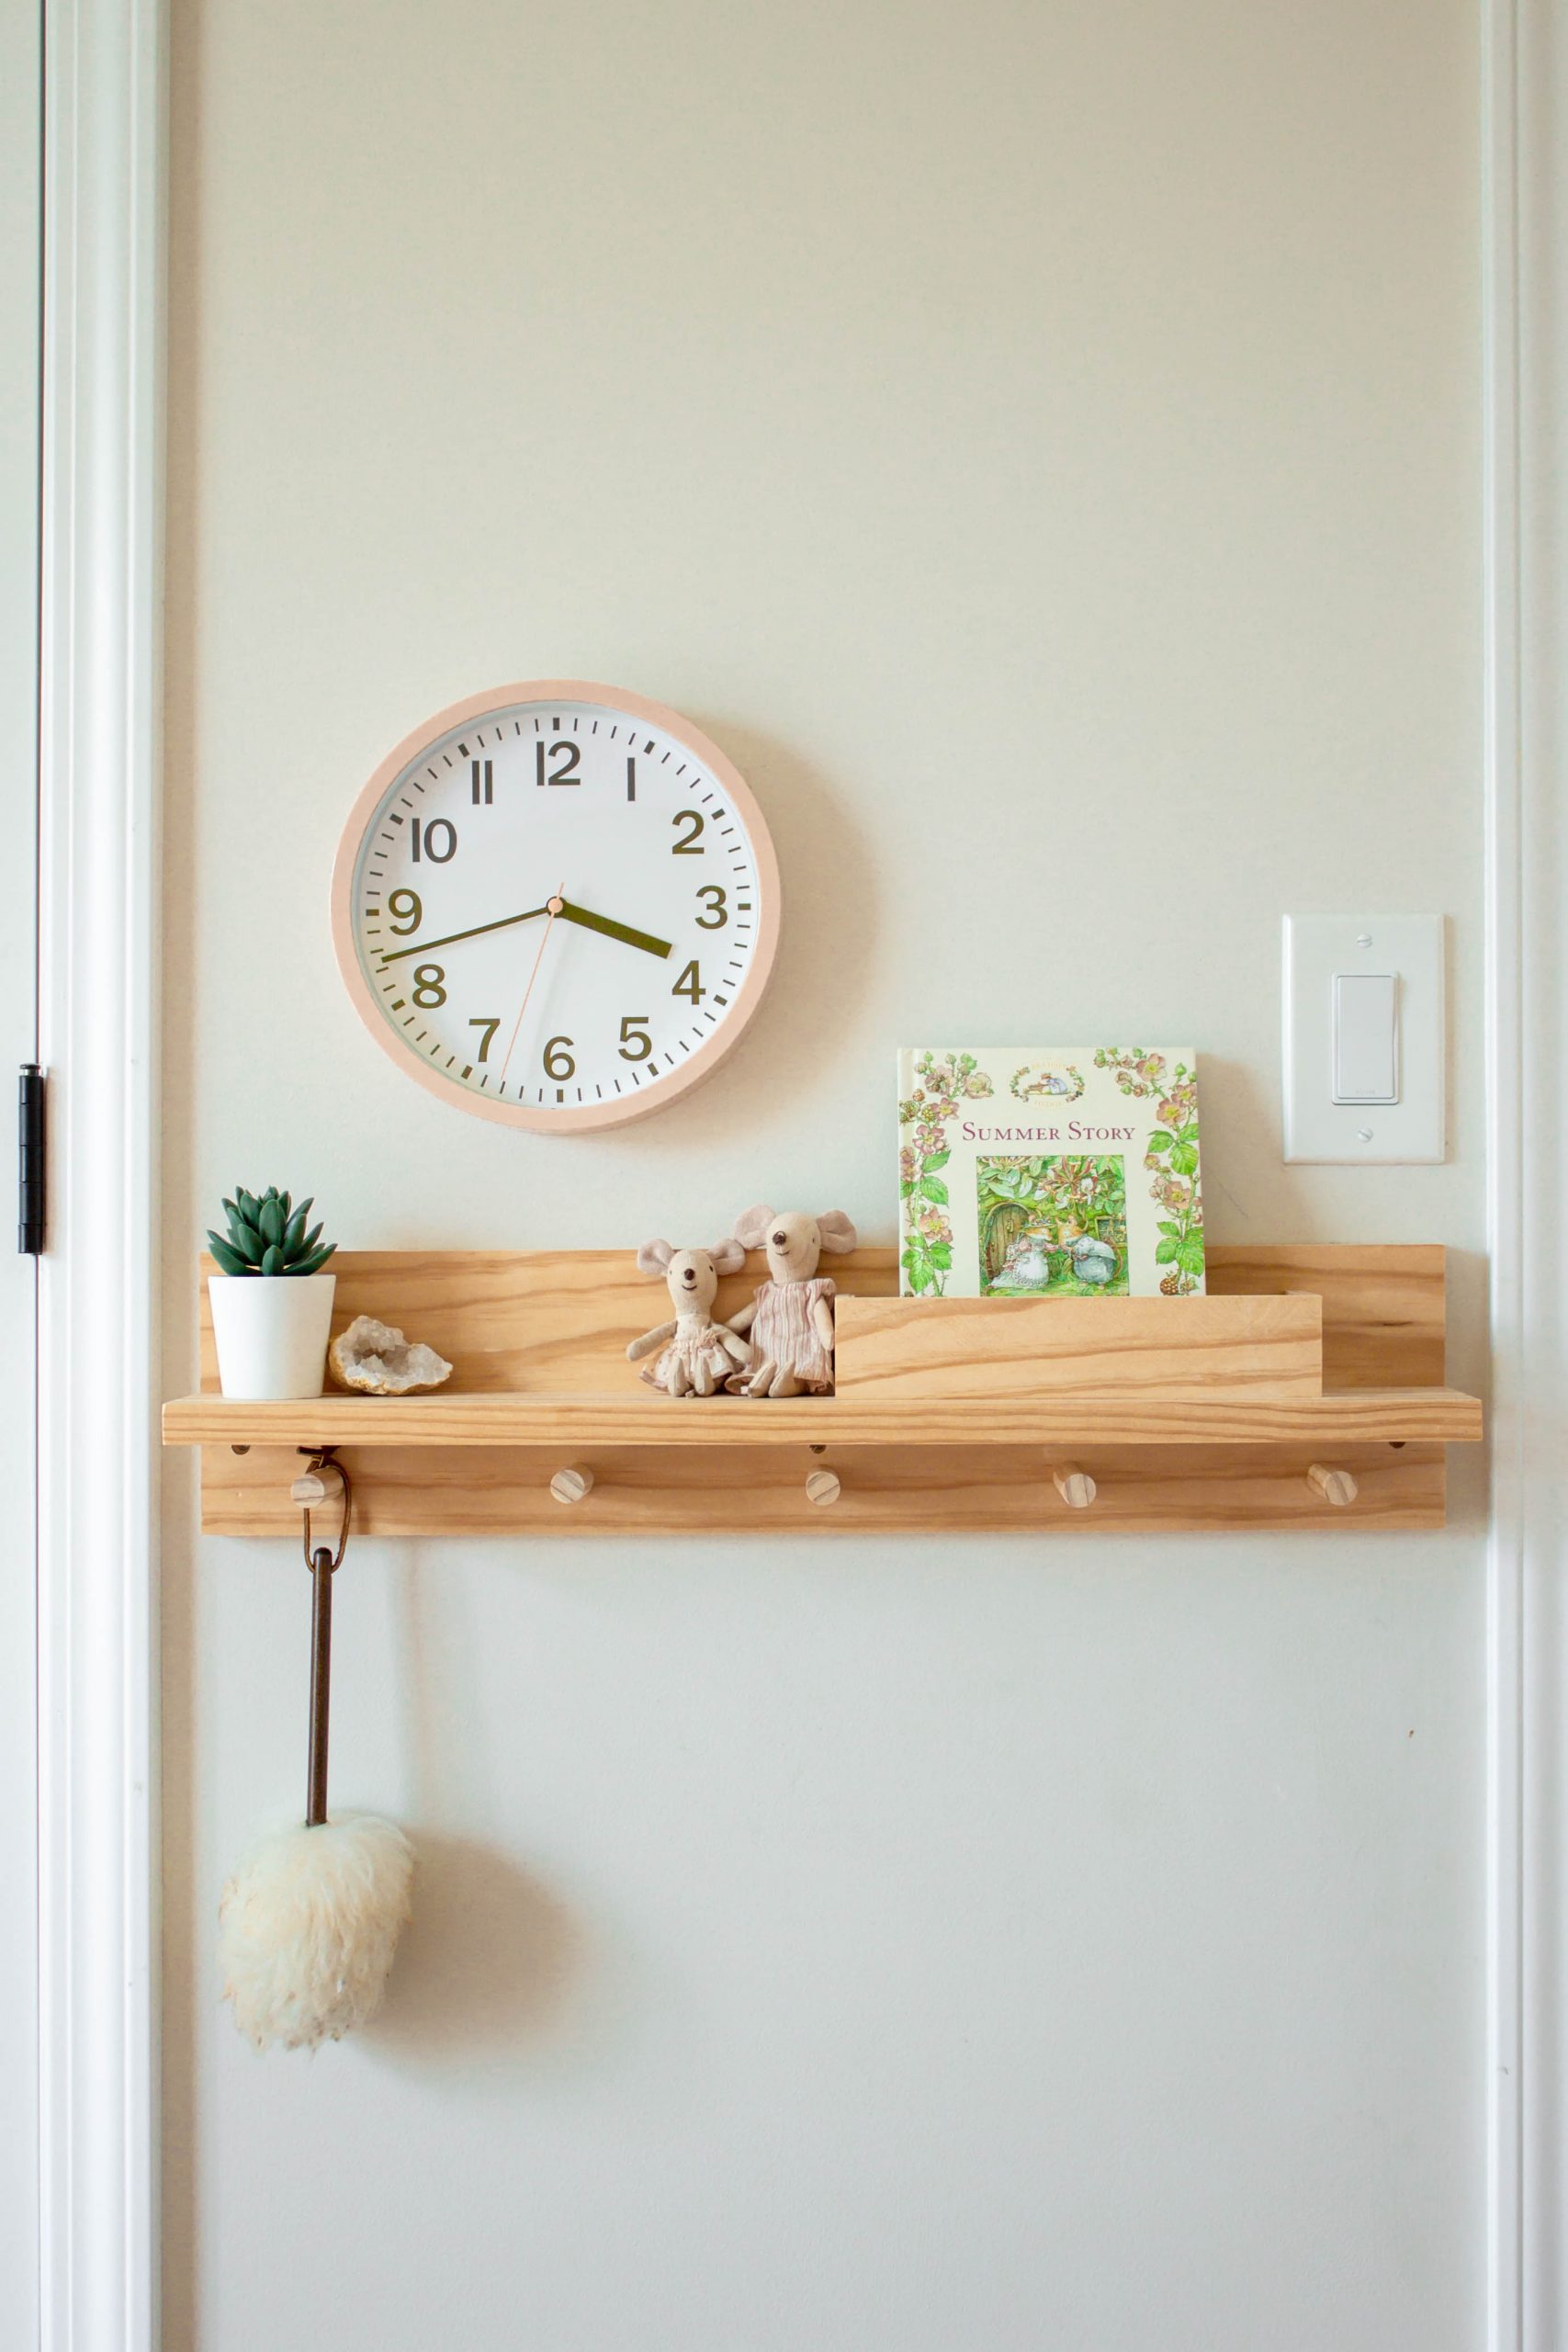 The Quickest and Easiest Way to Hang Shelves and Hooks for a Family  Organization Center